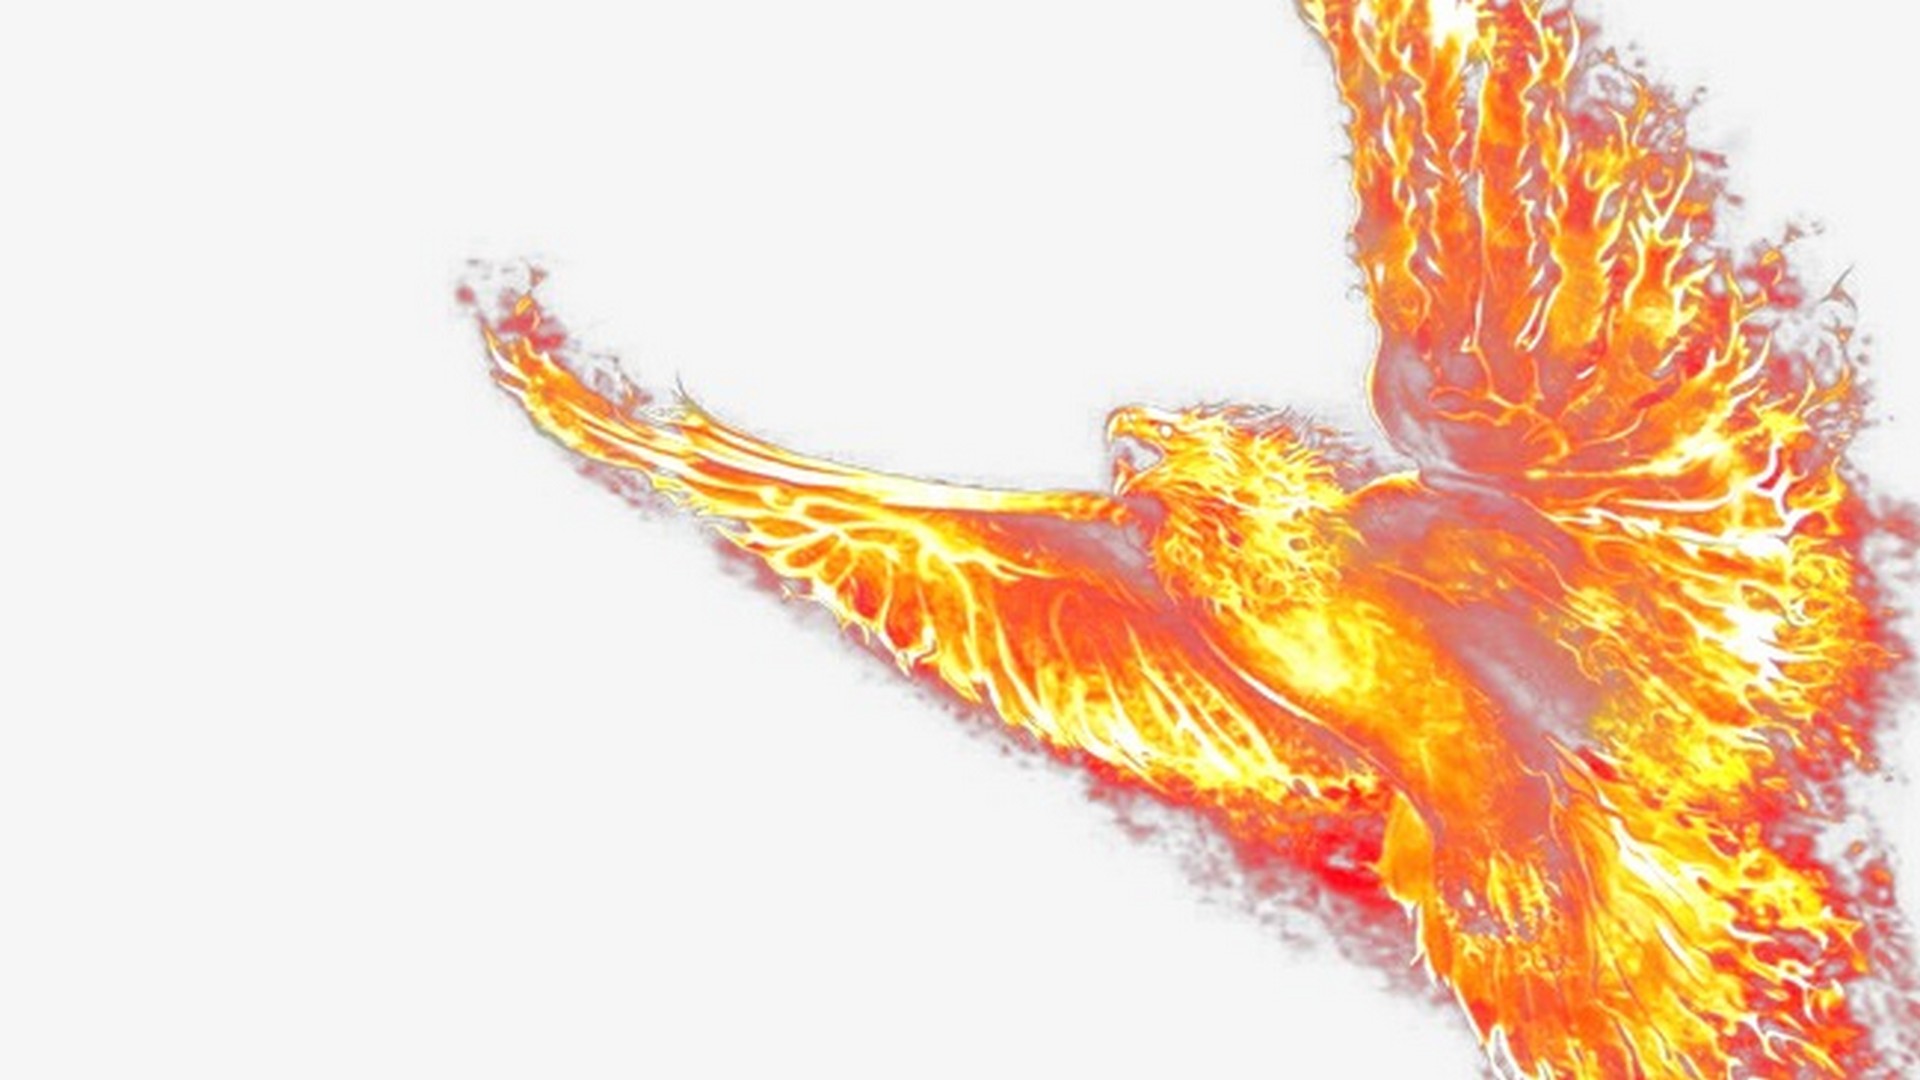 Phoenix Images Wallpaper For Desktop with resolution 1920X1080 pixel. You can use this wallpaper as background for your desktop Computer Screensavers, Android or iPhone smartphones